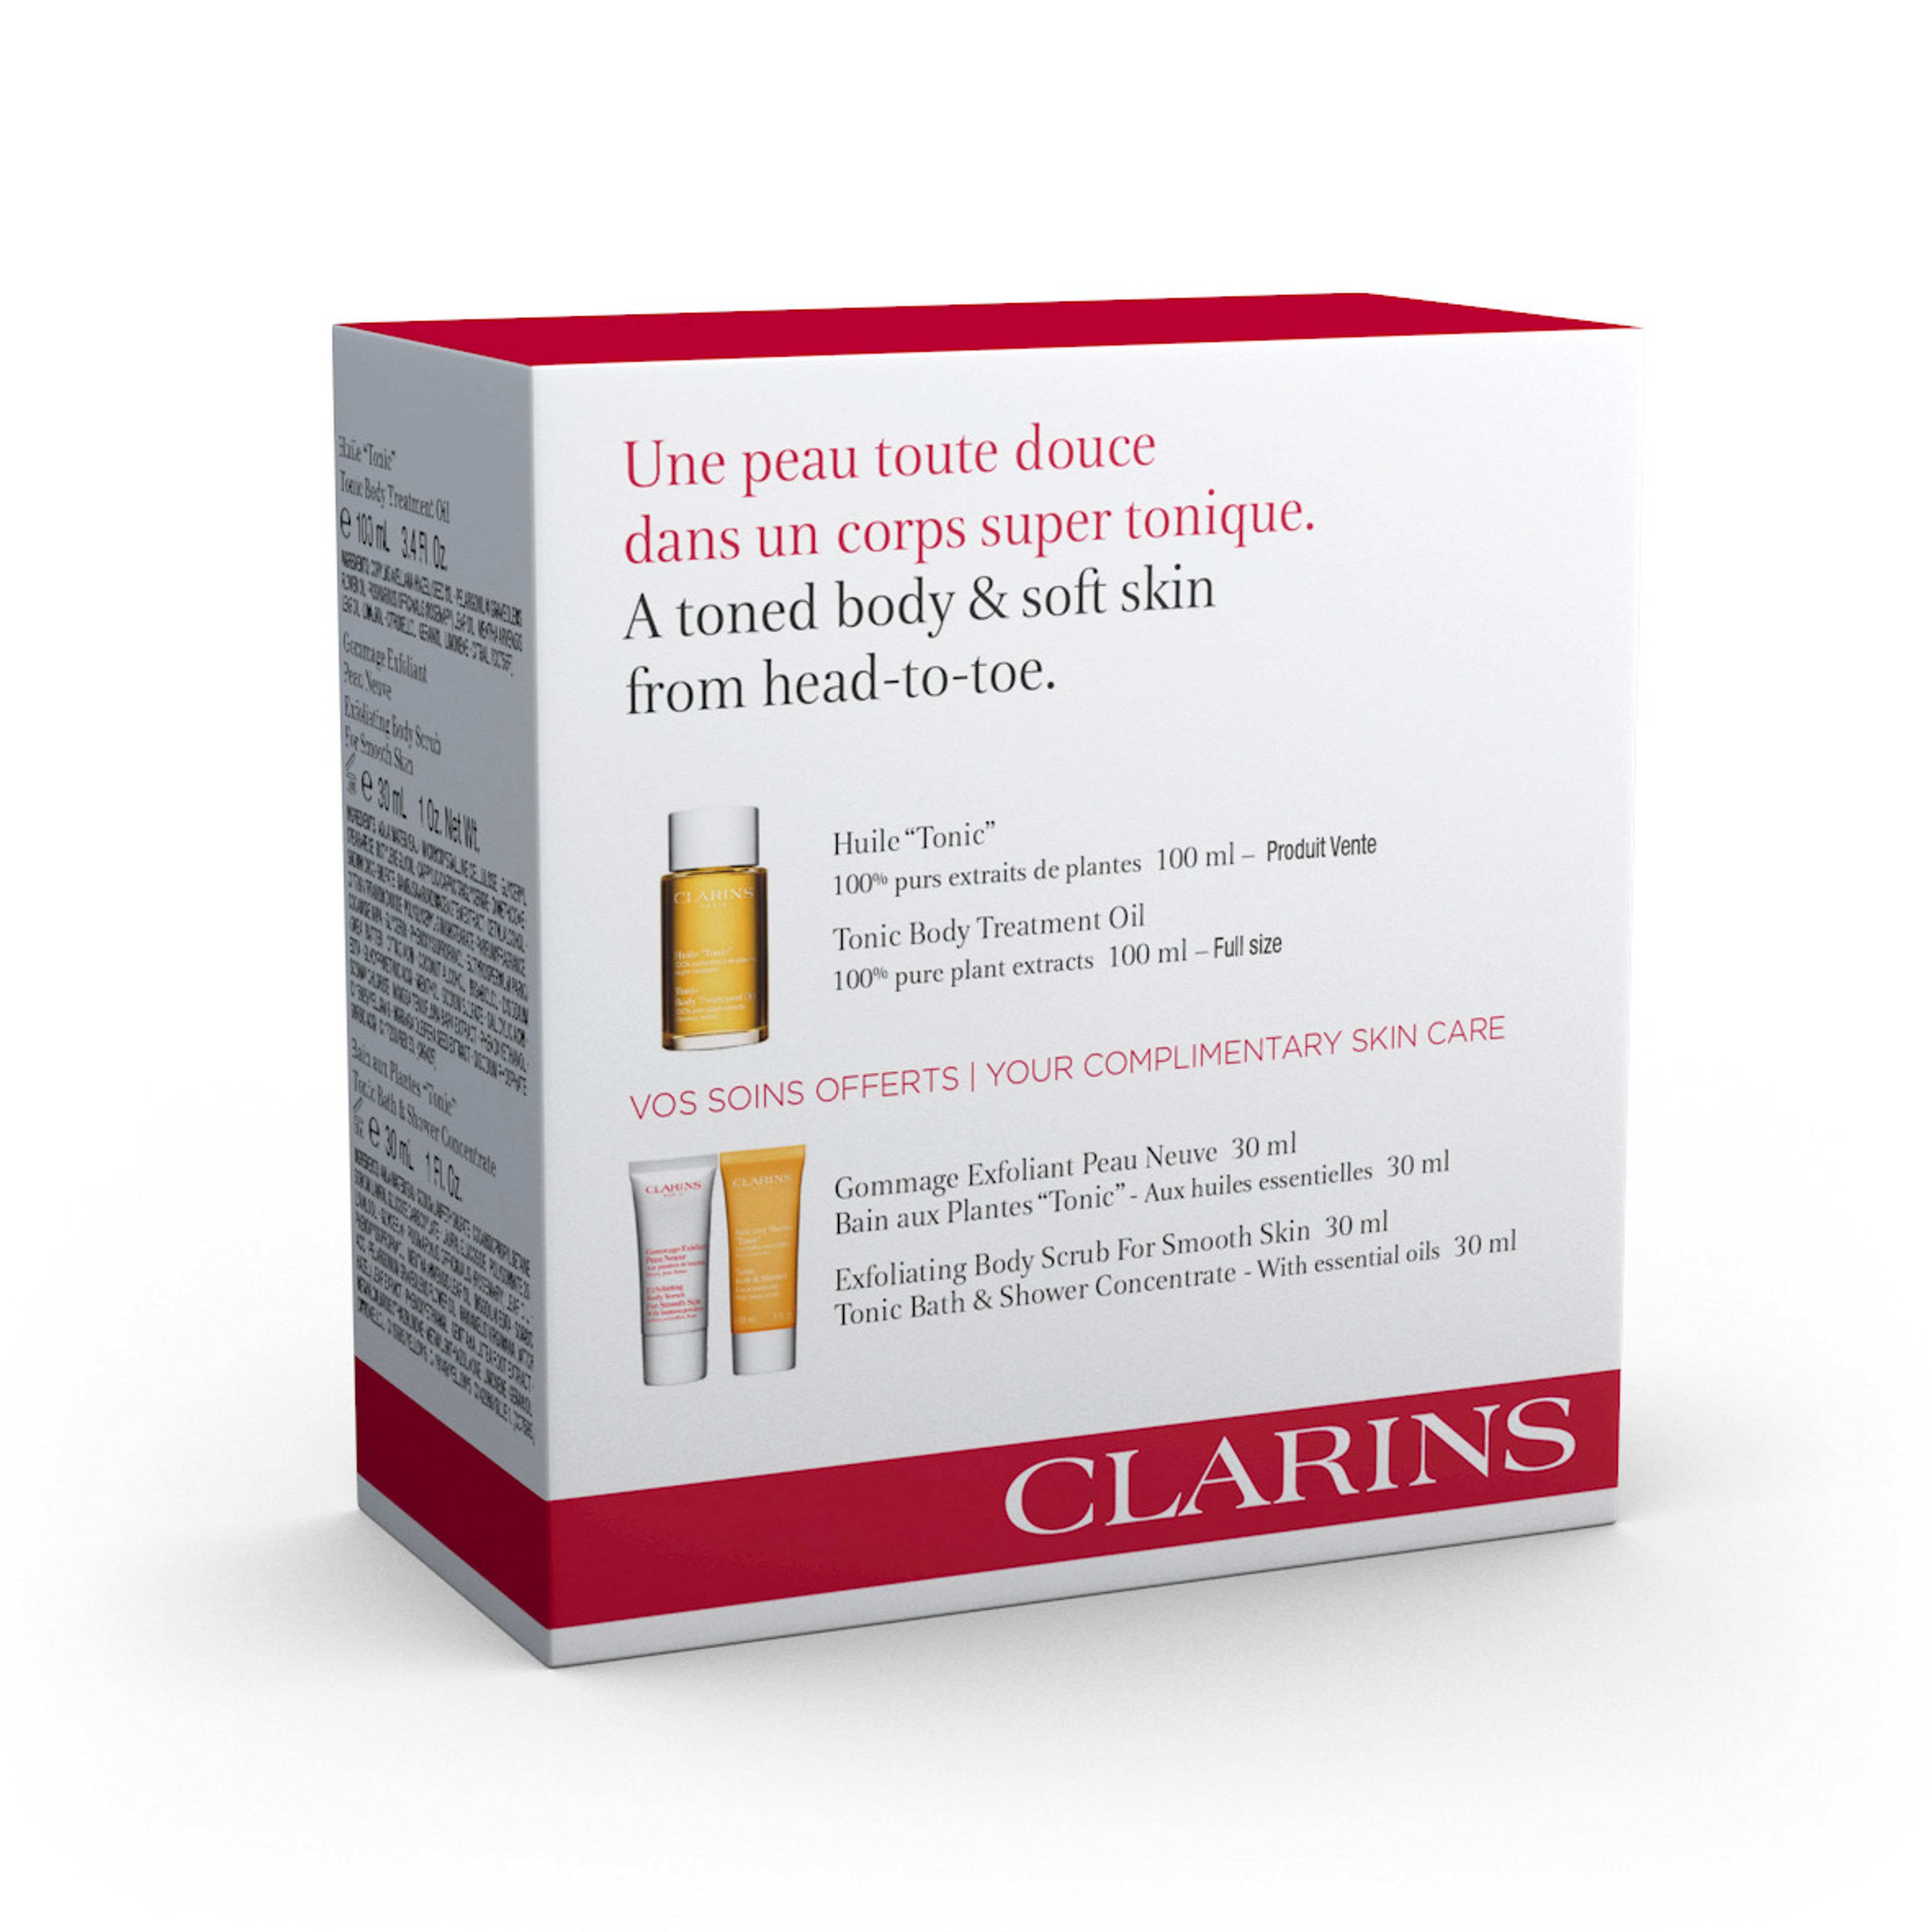 Clarins Spa @ Home Value Pack 2